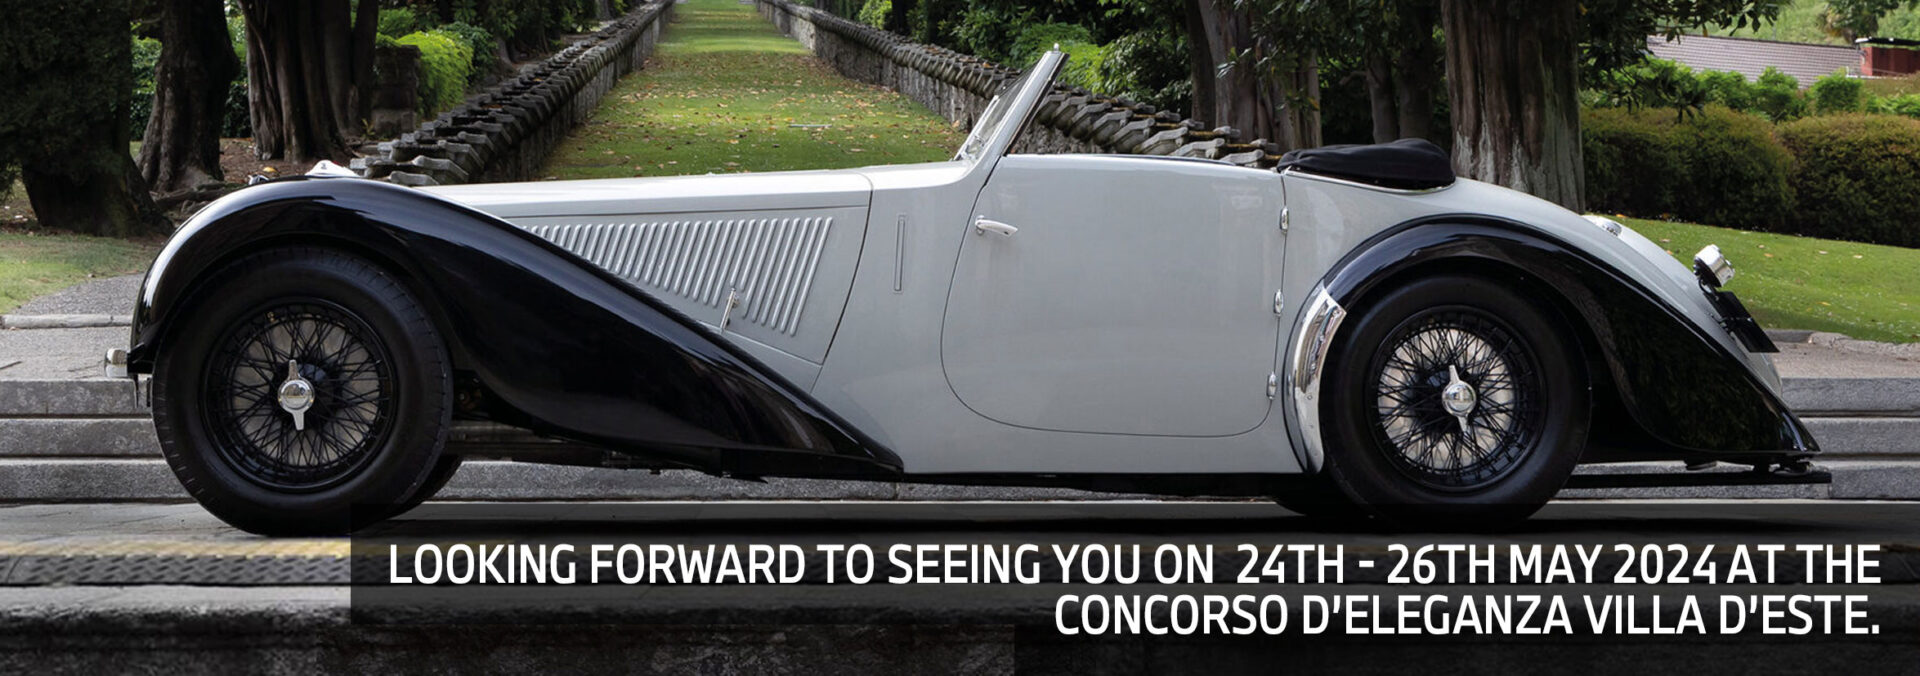 Looking forward to seeing you on 24th - 26th may 2025 at the concorso d’eleganza villa D’este.